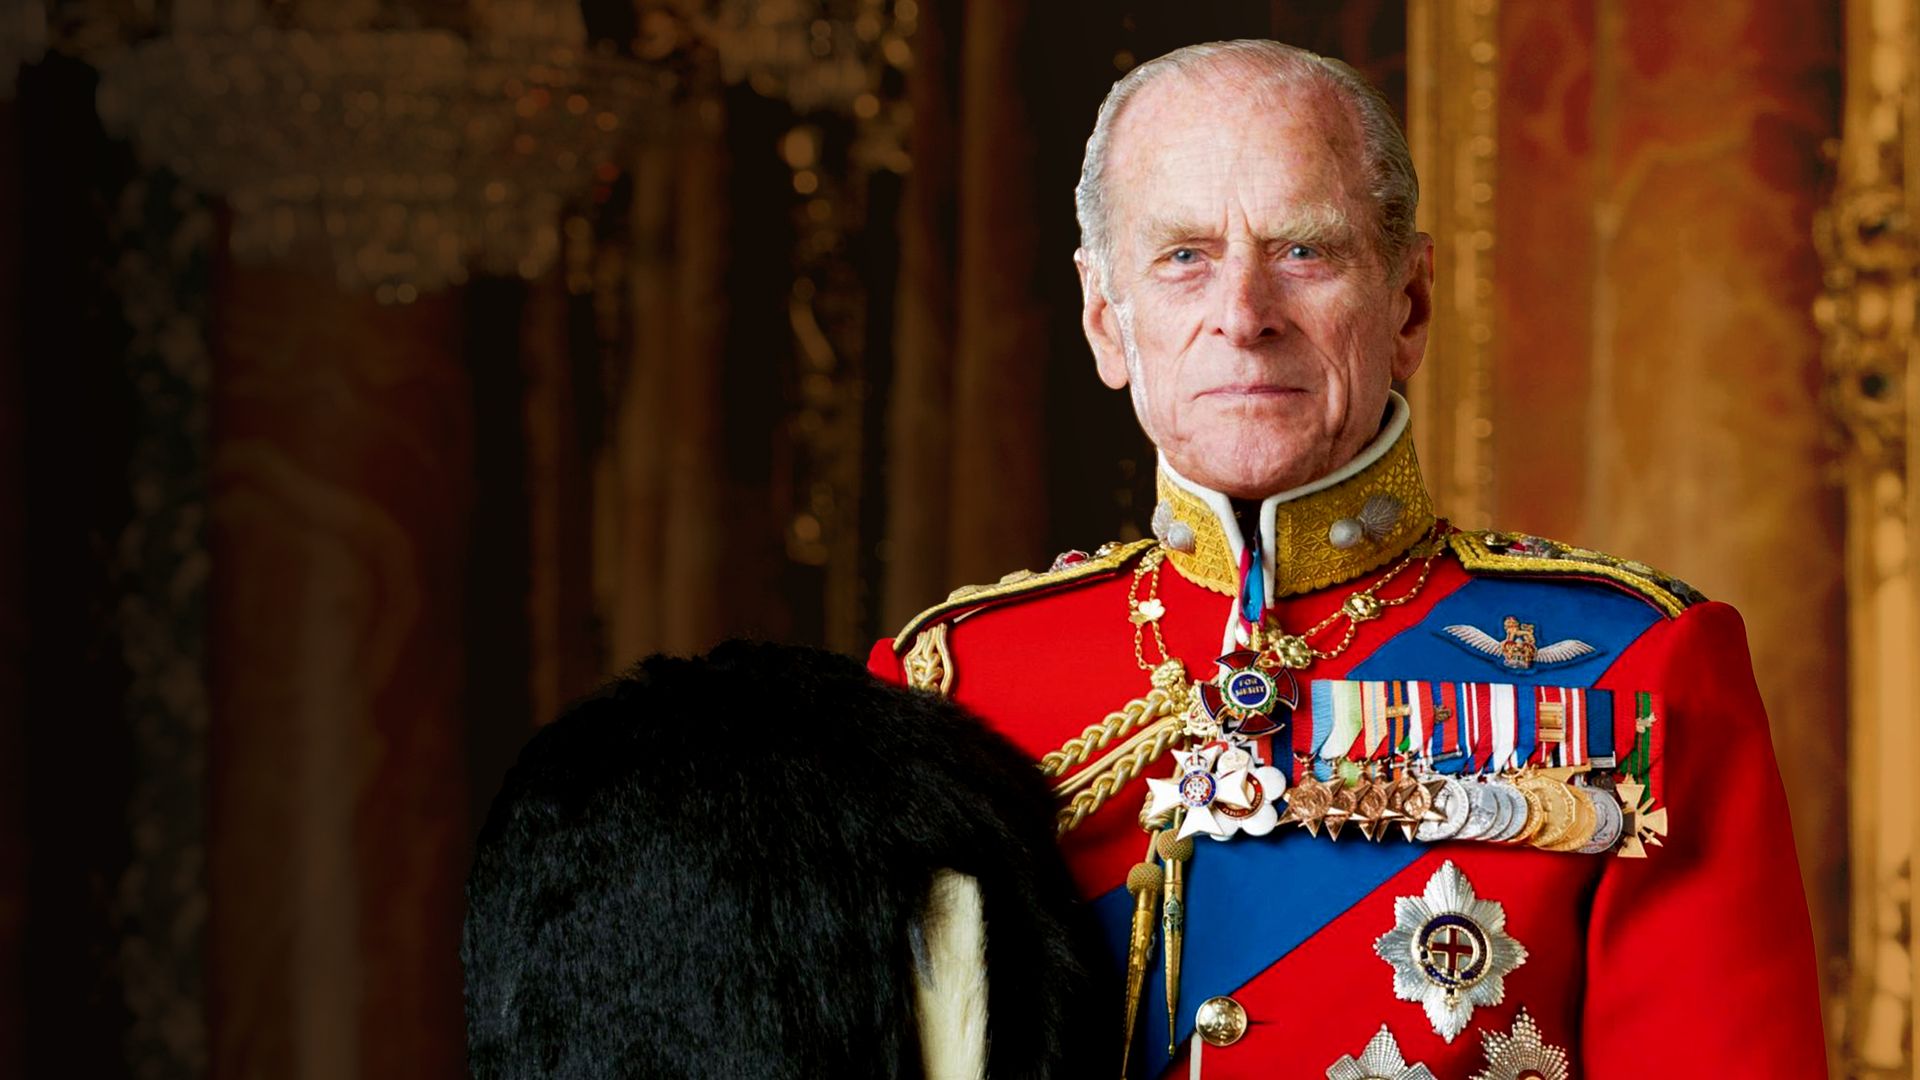 The Real Prince Philip